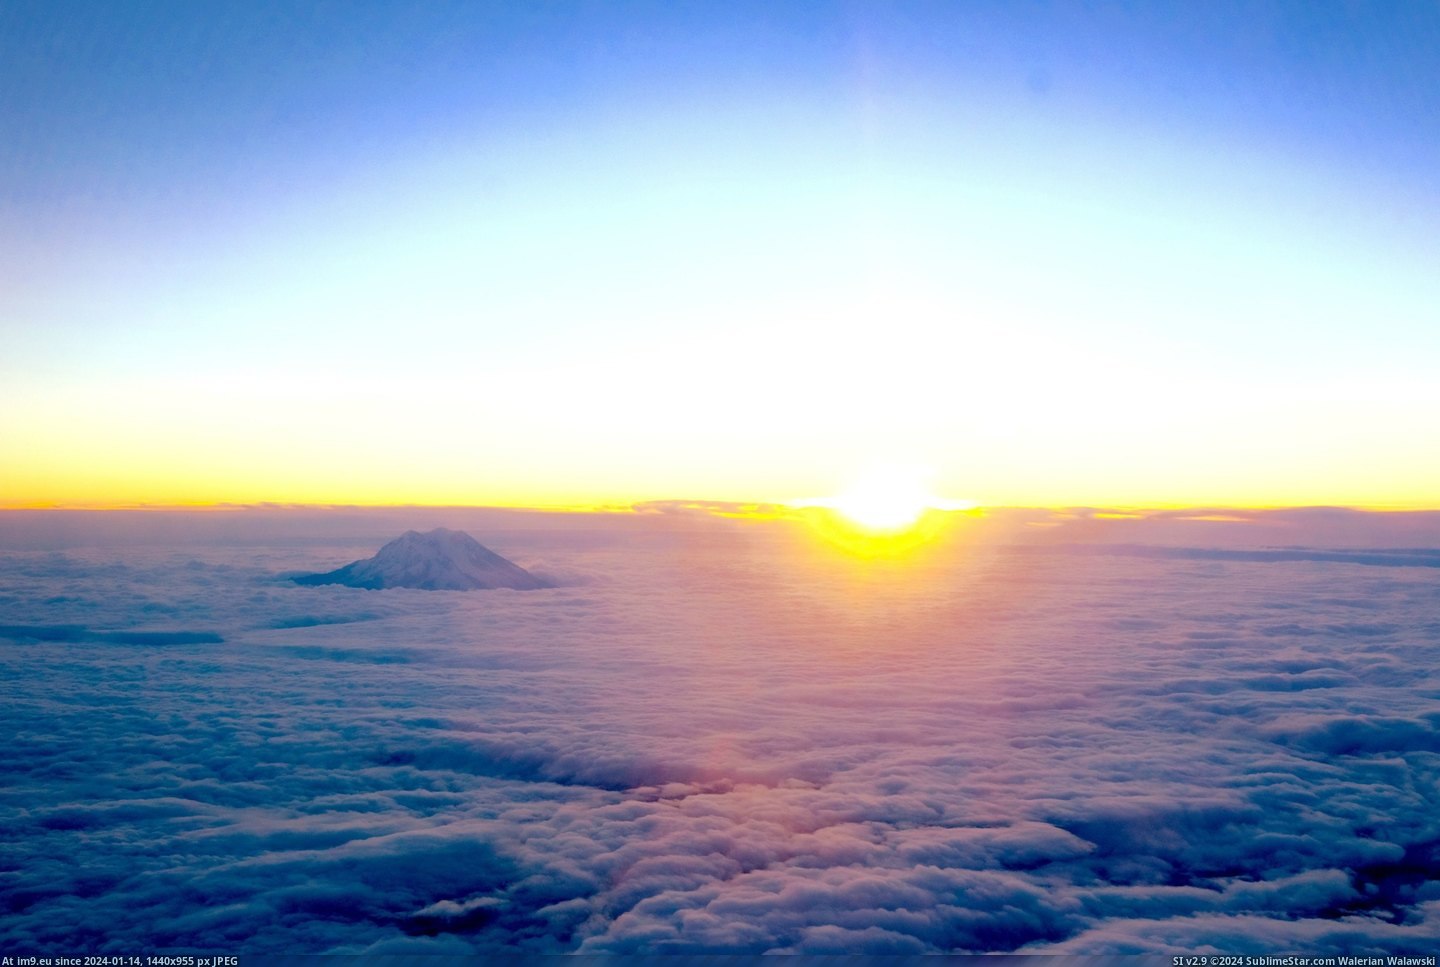 #Beautiful #Morning #Flew #4000x2667 #Sunrise #Rainier [Earthporn] I flew over Mt. Rainier this morning and the Sunrise was beautiful!  [4000x2667] Pic. (Image of album My r/EARTHPORN favs))